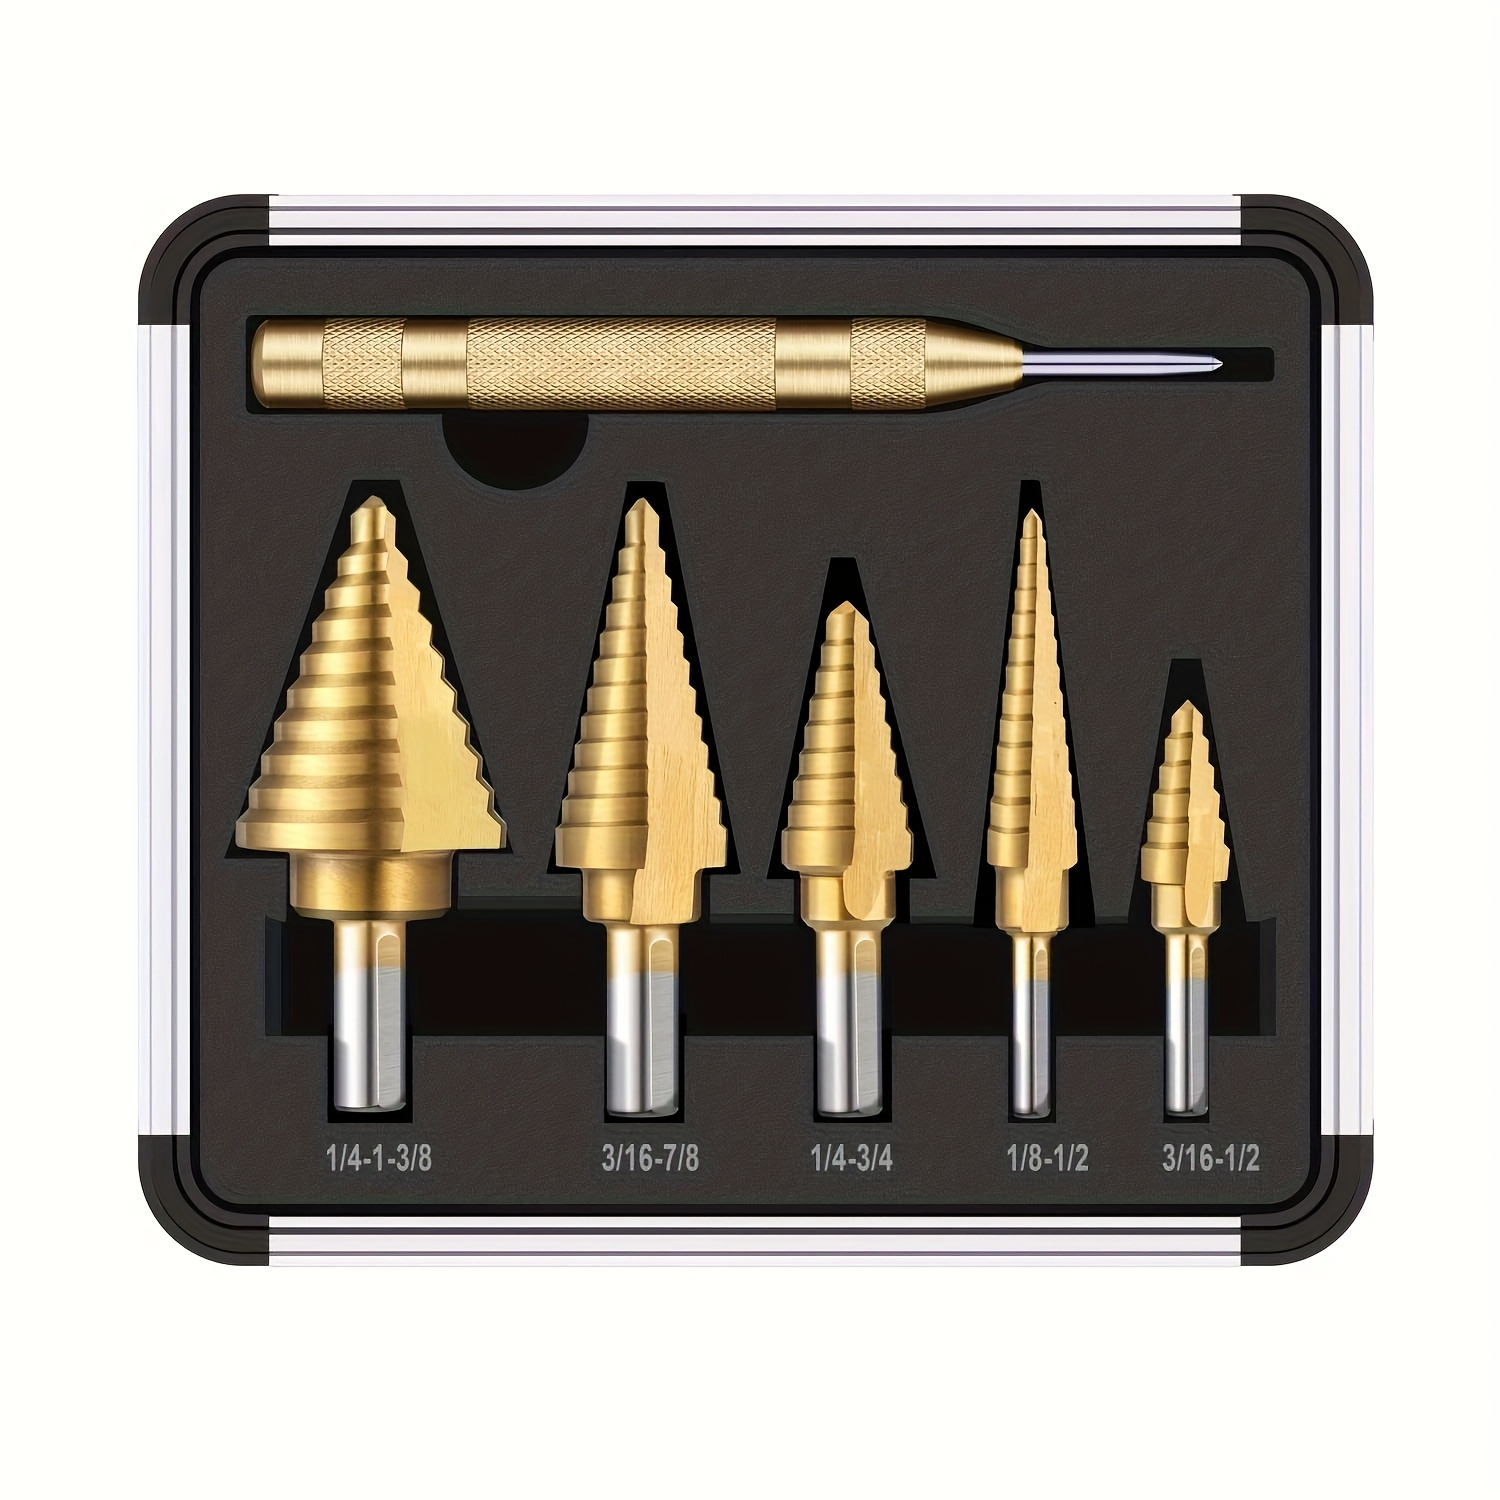 

6pcs/set, 5pcs Hss Titanium 50 Sizes In 5 Step Drill Bits Set With 1pc Automatic Spring Loaded Center Punch Circle Hole Cutter X-shaped Mouth Metal Set